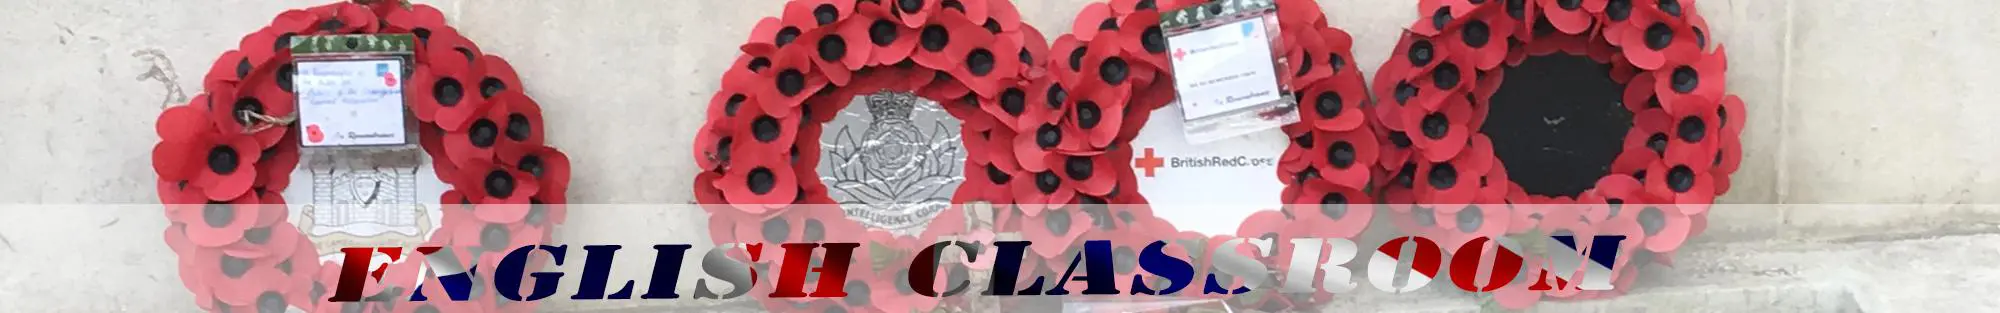 red poppies wreath header english classroom